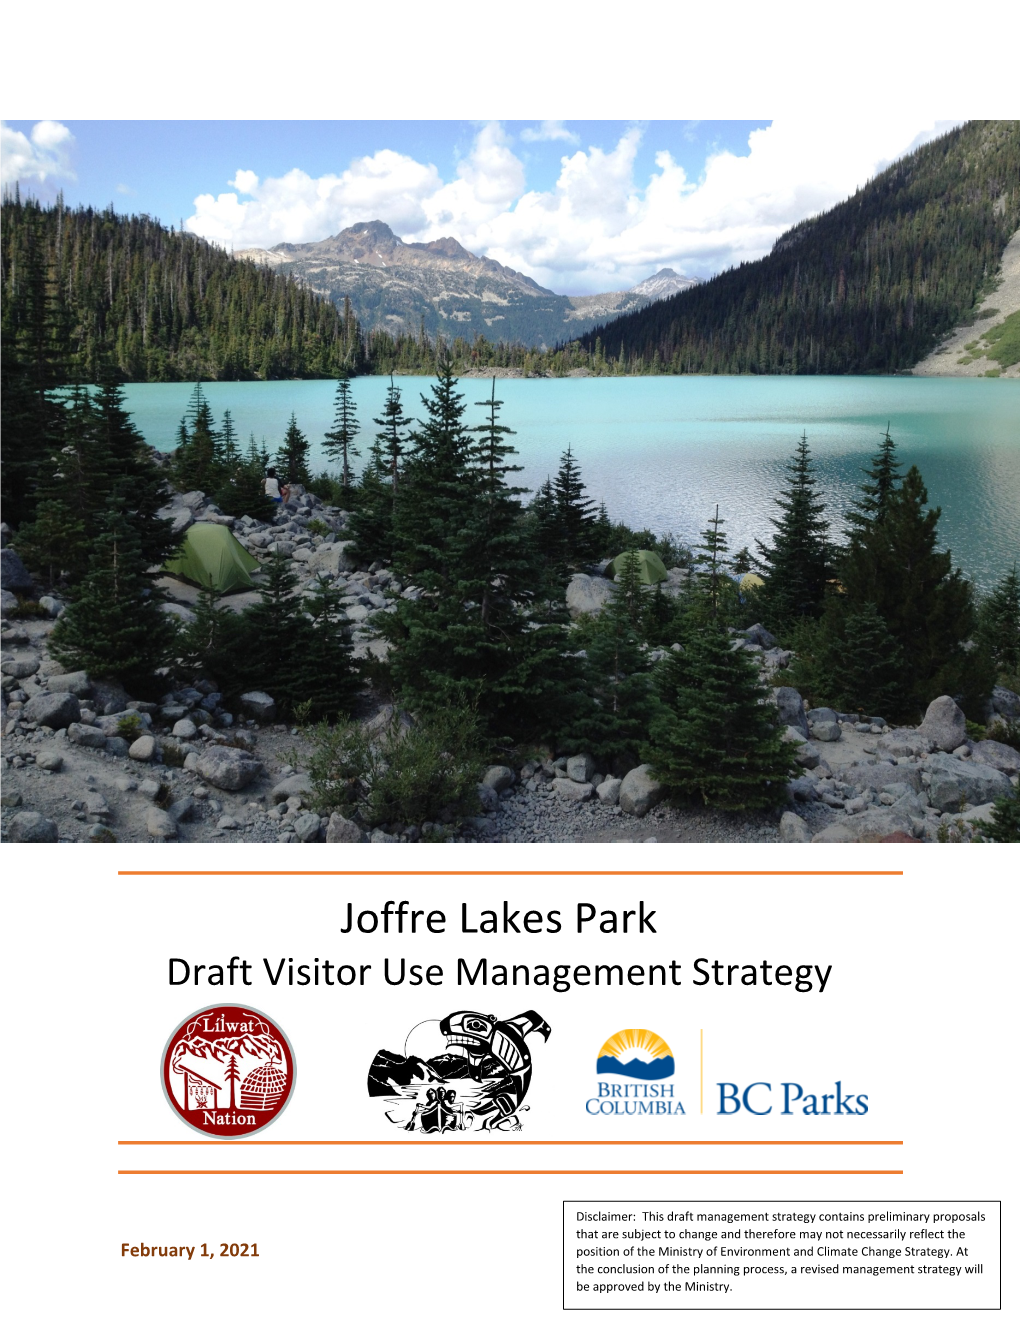 Joffre Lakes Park Draft Visitor Use Management Strategy